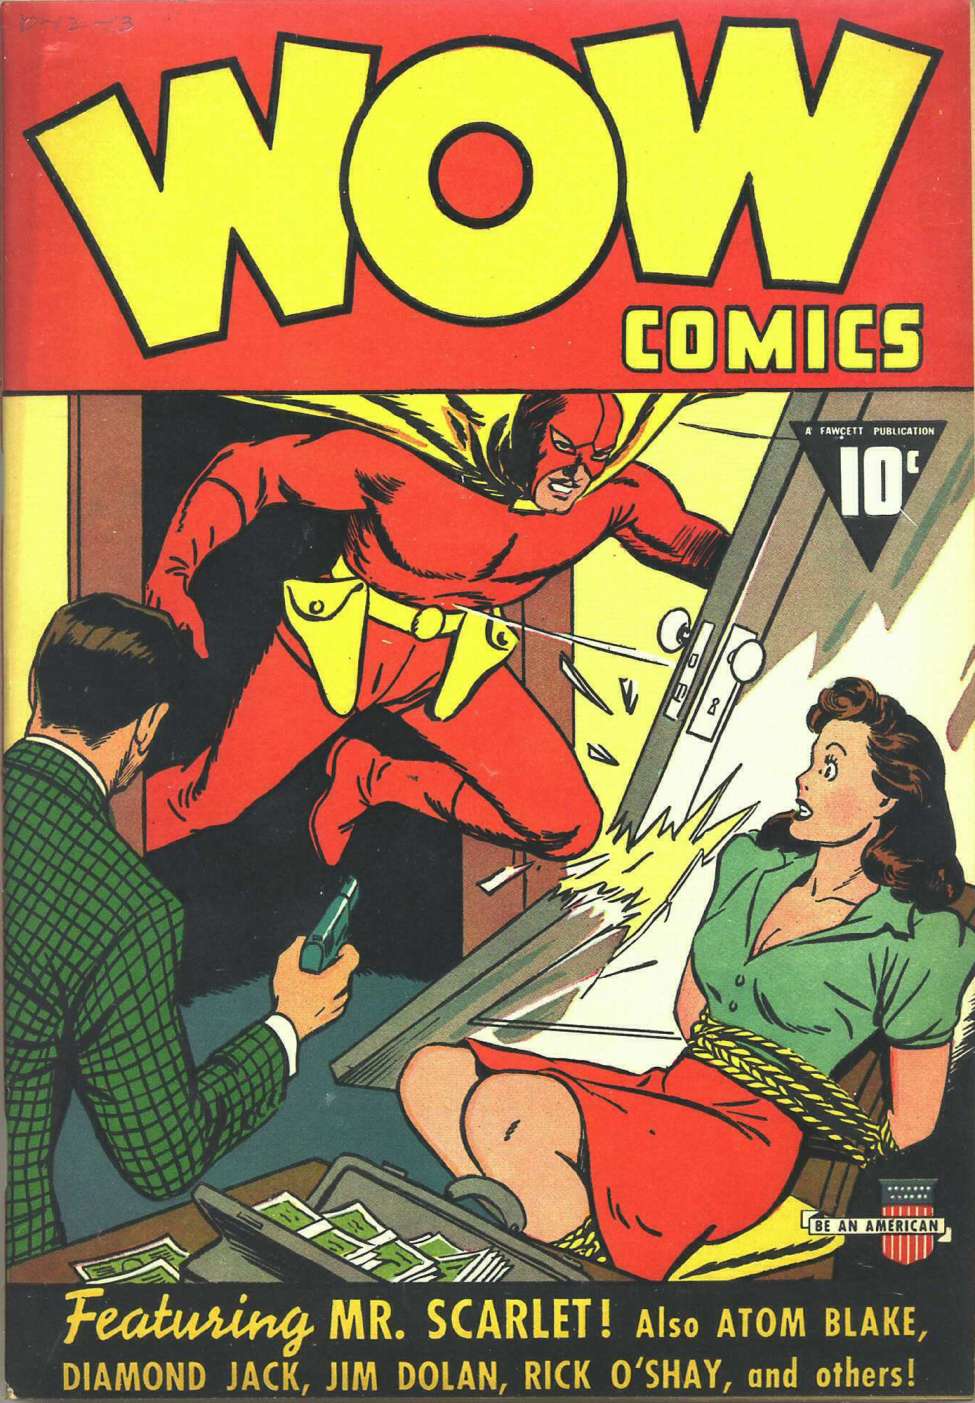 Comic Book Cover For Wow Comics 1 - Version 2